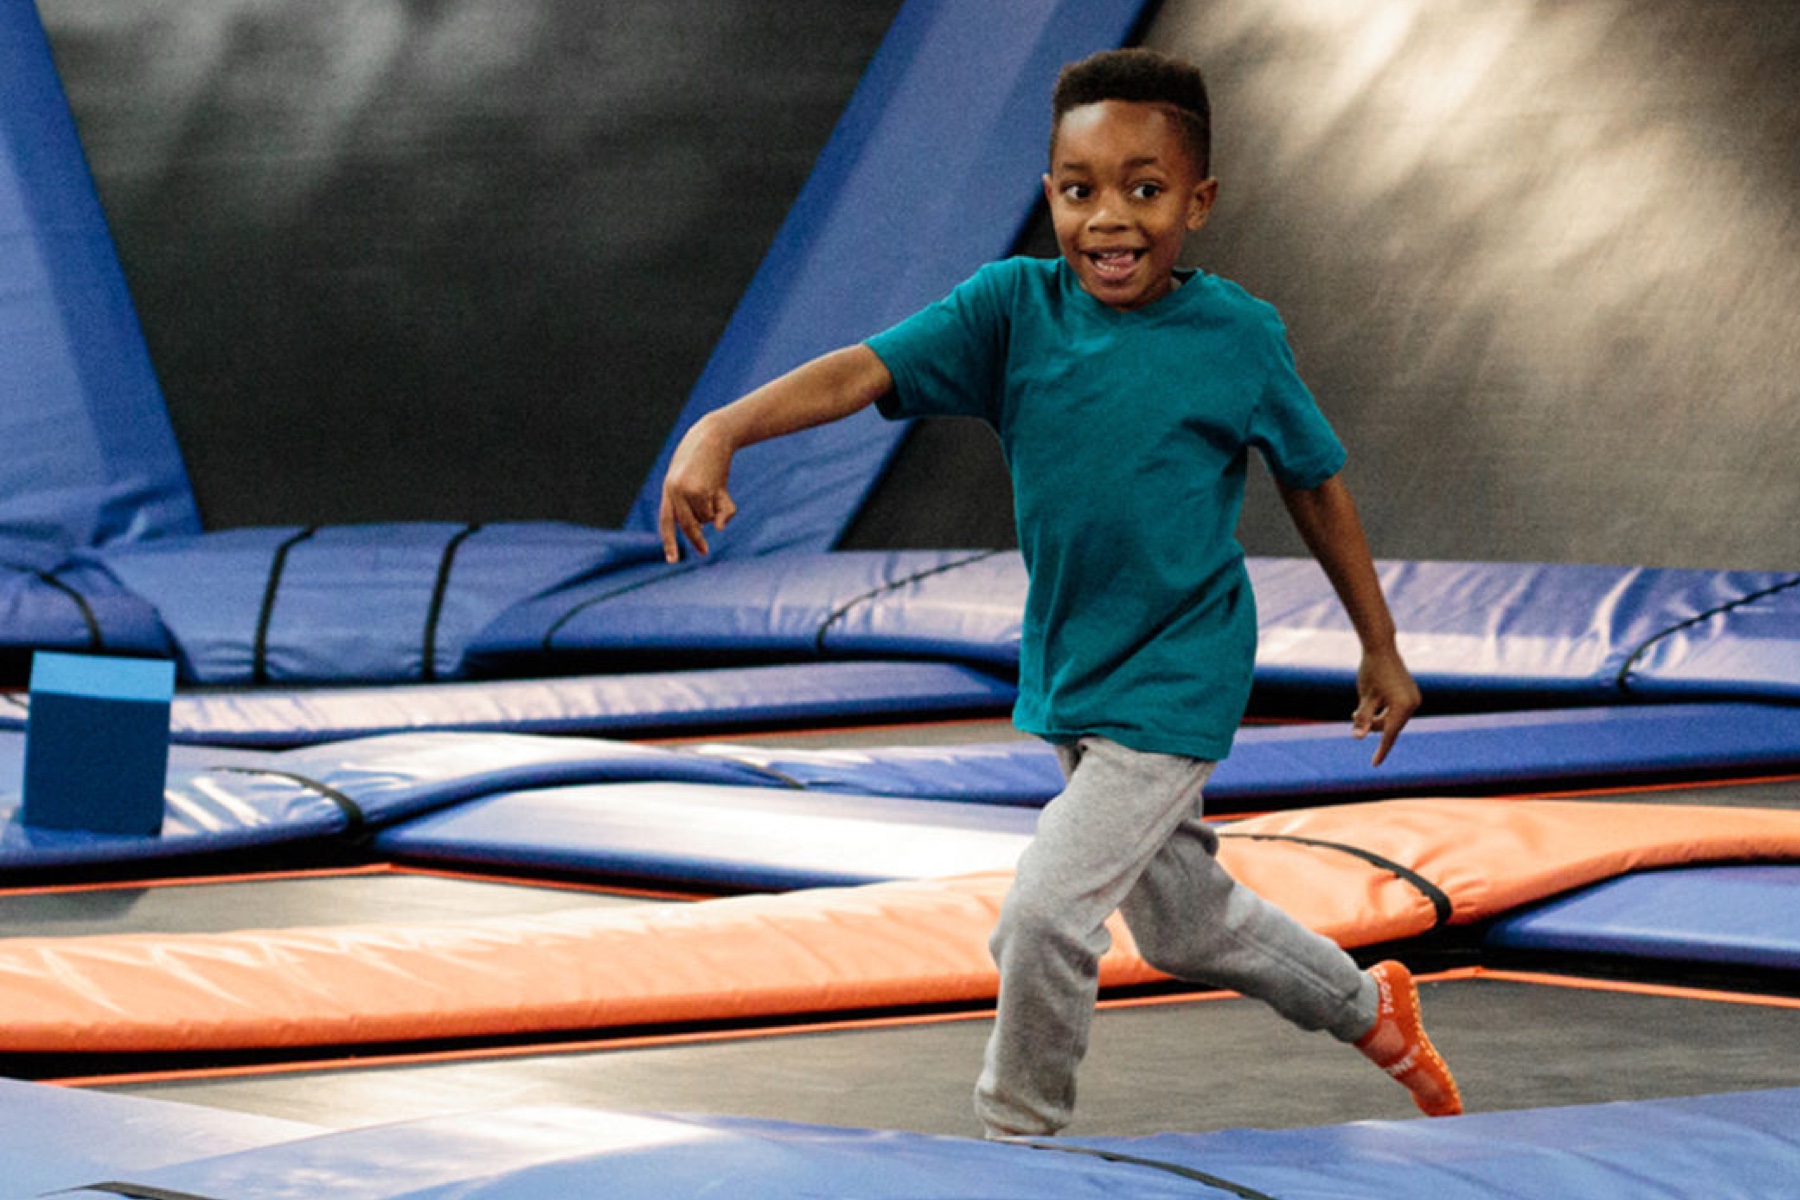 A young boy on a large trampoline.